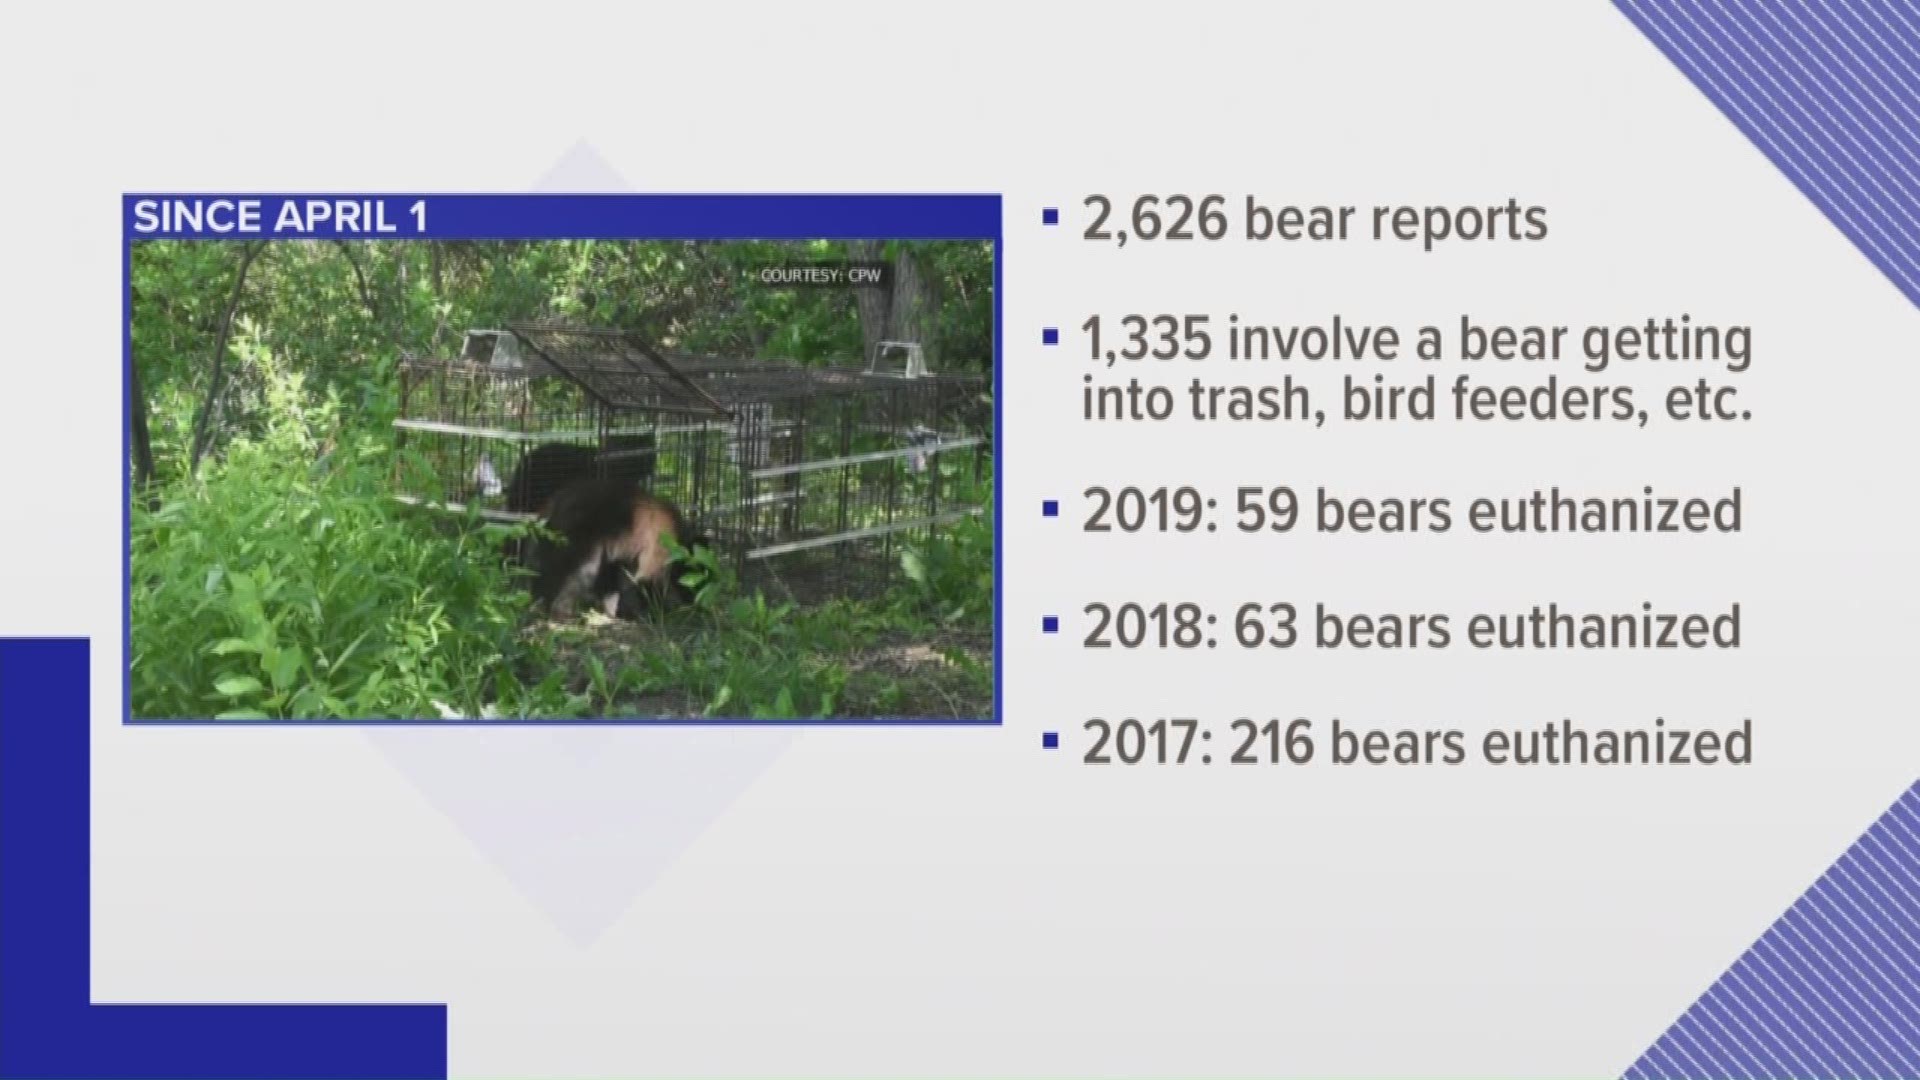 There have been more than 26,00 bear reports statewide since April 1st.